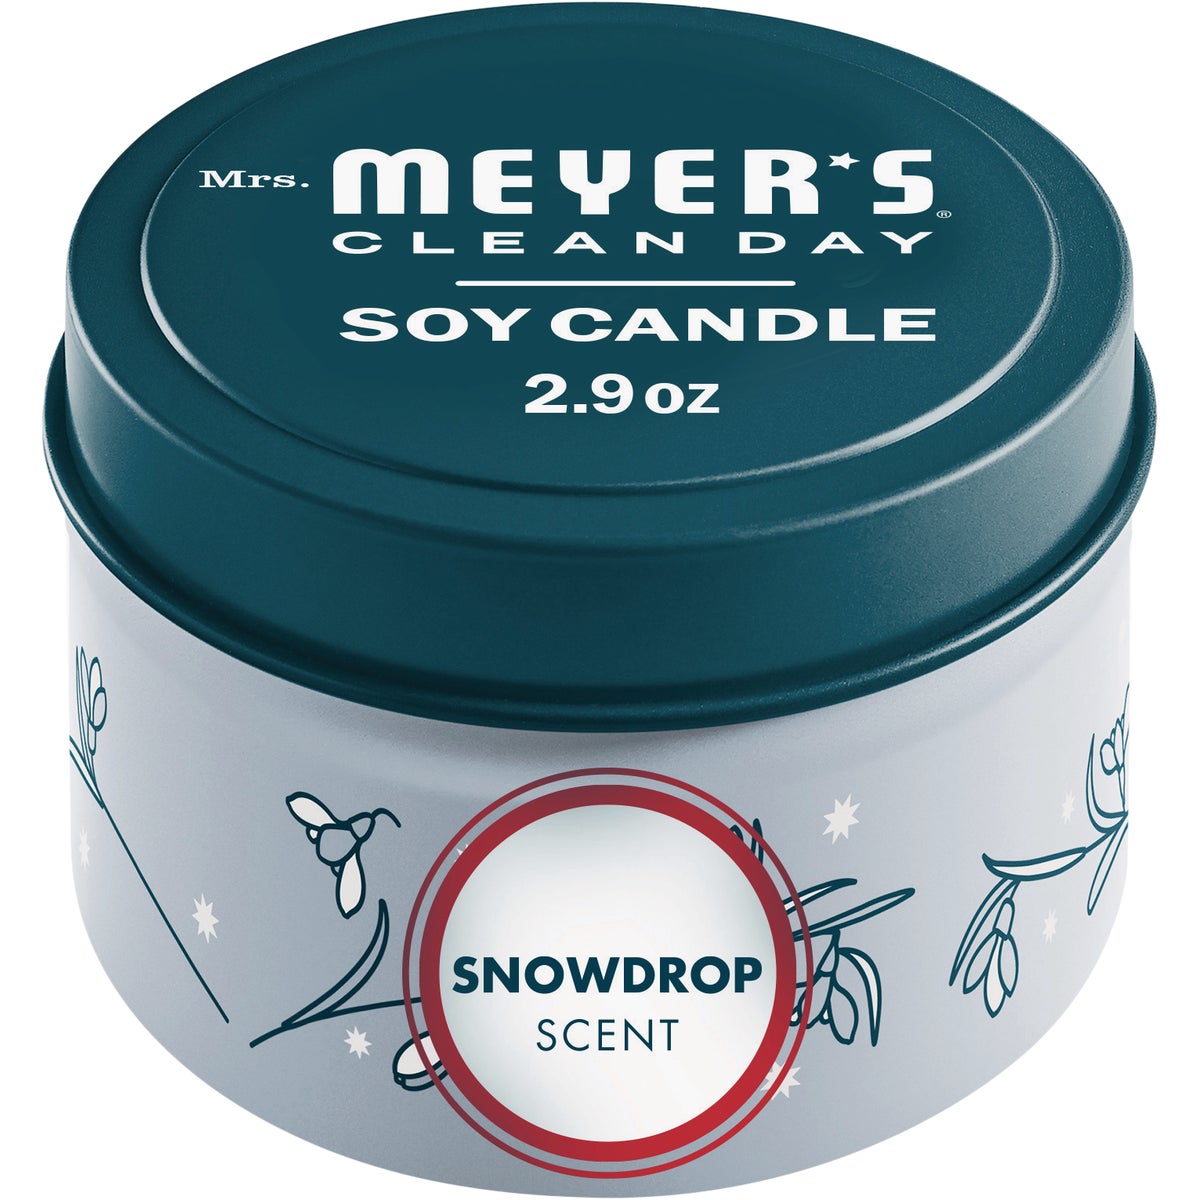 Mrs. Meyer's Clean Day 2.9 Oz. Snowdrop Small Tin Soy Candle